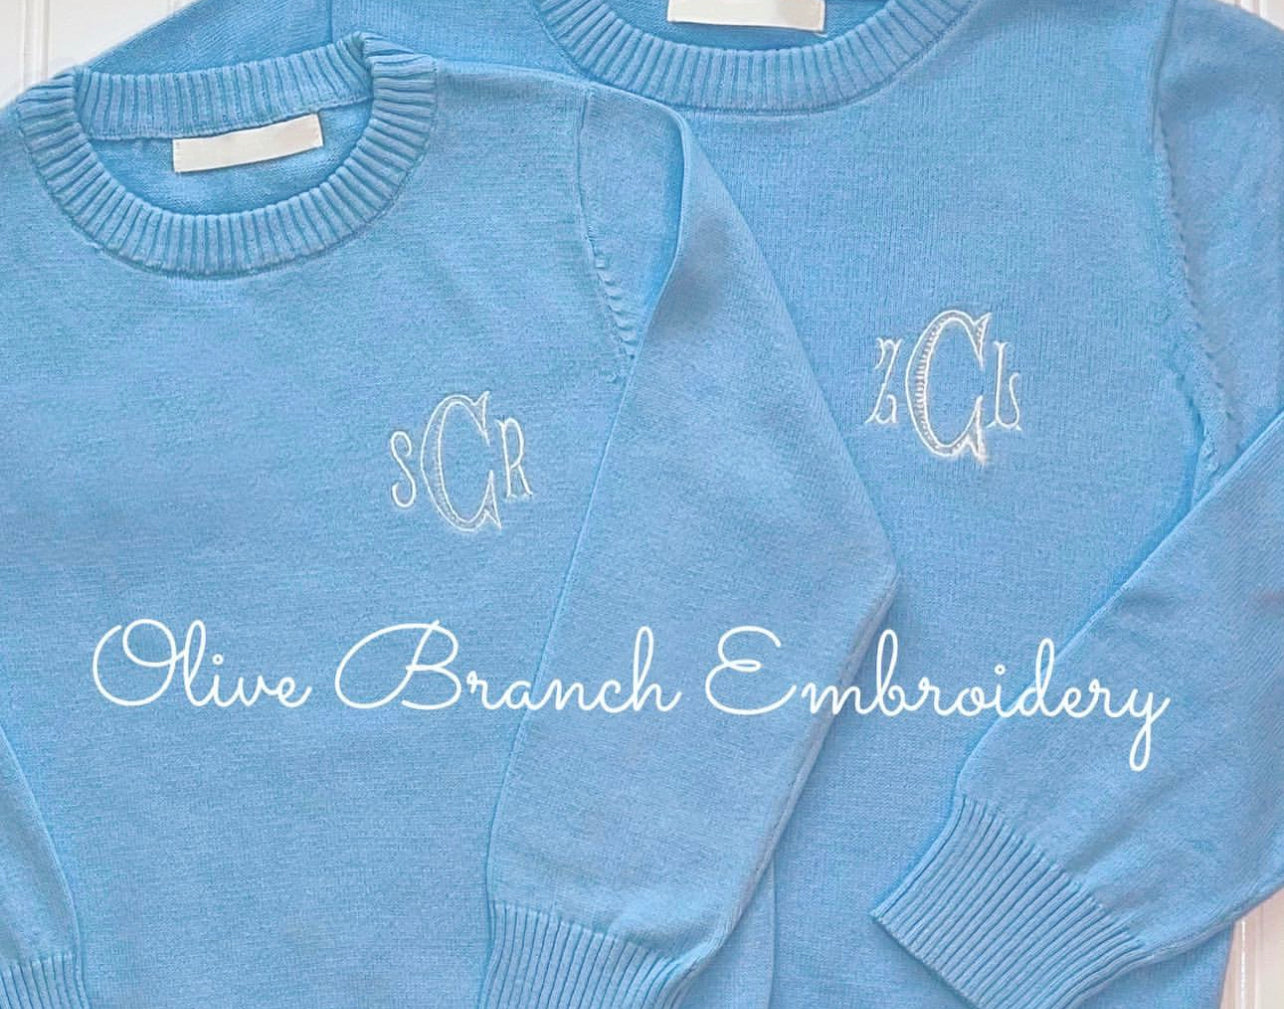 Children’s Sweater with Embroidery